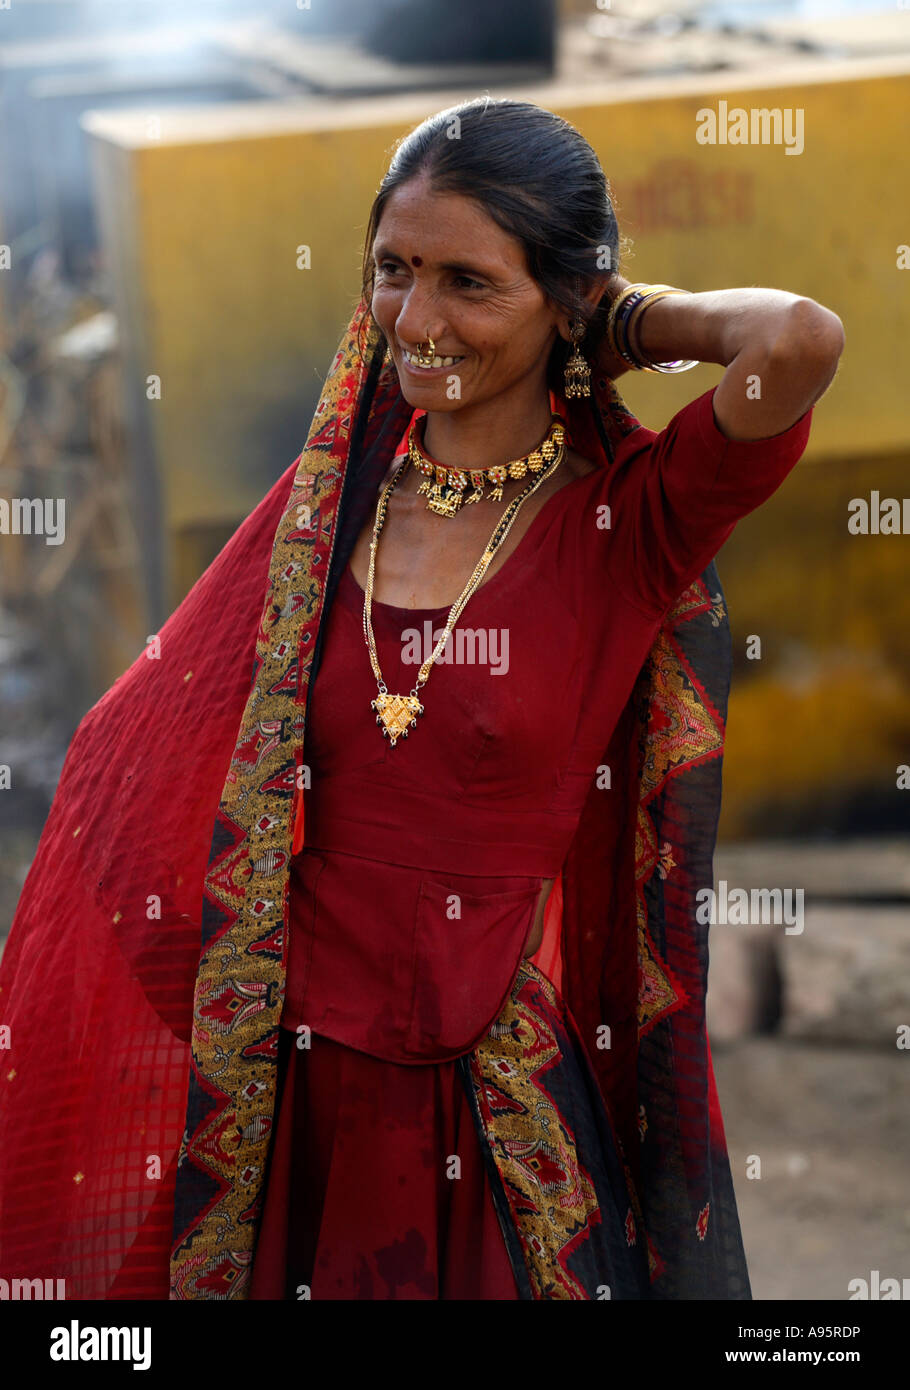 Indian Tribal woman from Kutch district at bus-stand, Bhuj, Gujarat, India Stock Photo